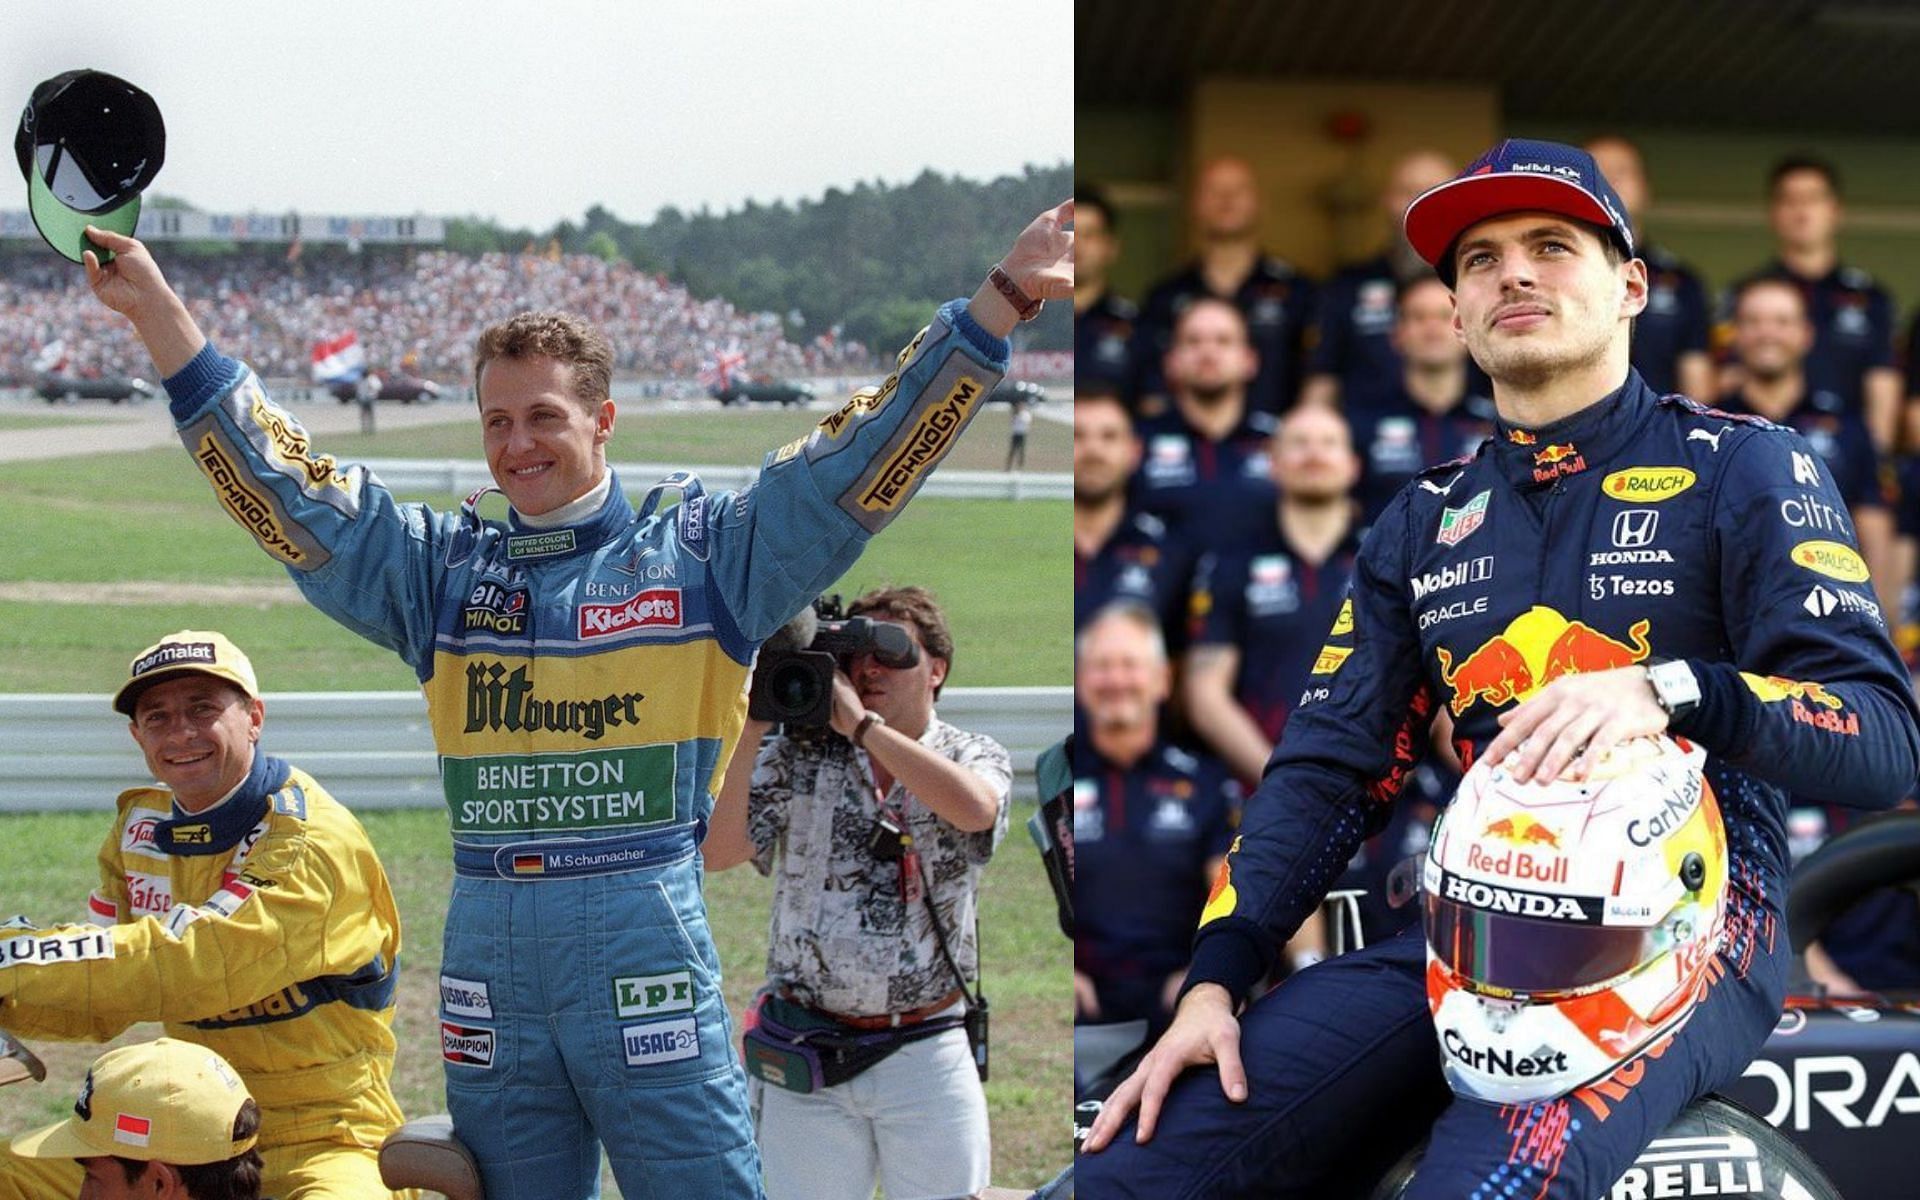 Michael Schumacher (left) and Max Verstappen (right) (Images sourced from their official Instagram profiles)